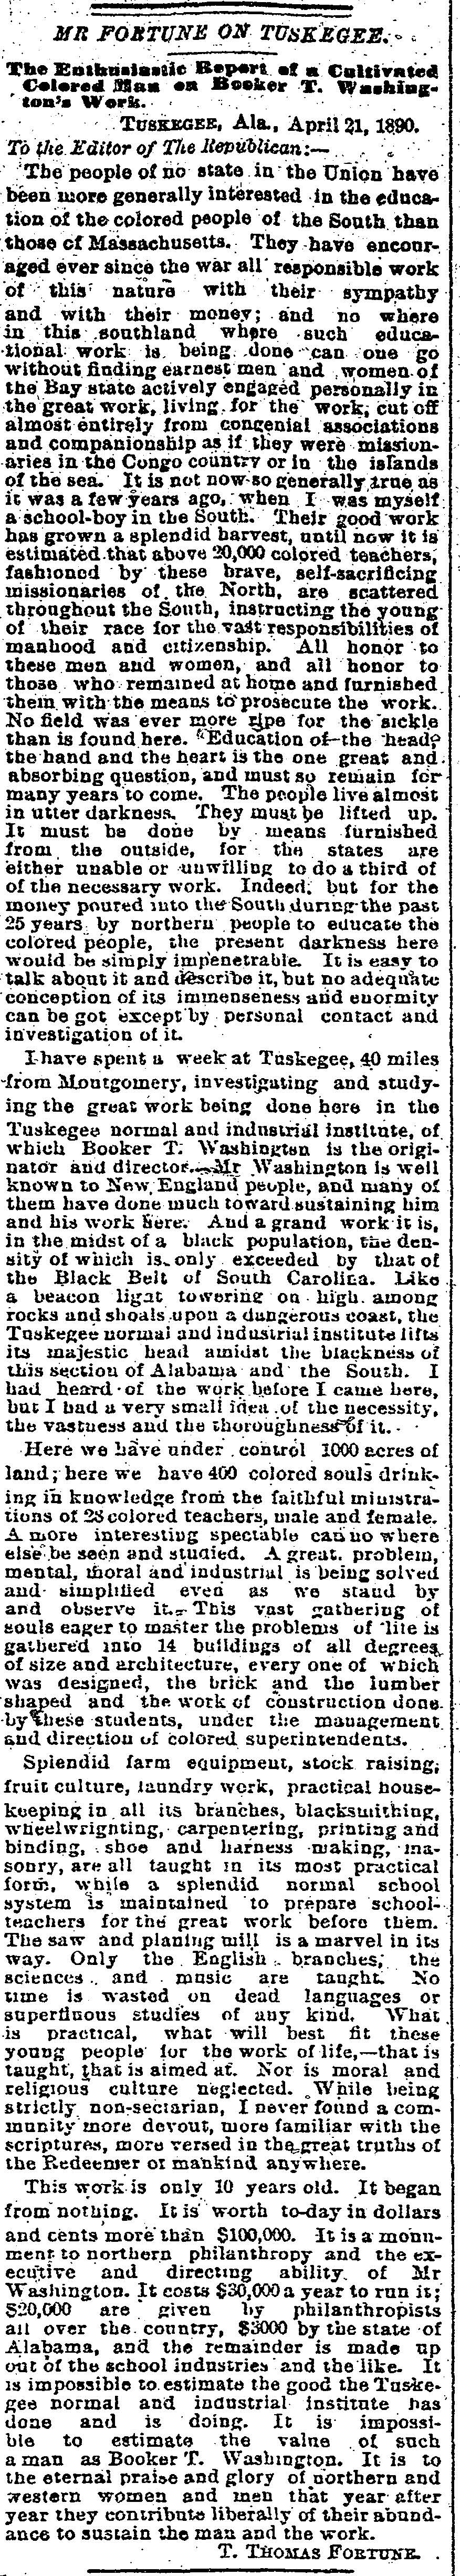 Springfield Republican. April 28,1890. From Early American Newspapers, 1690-1922.